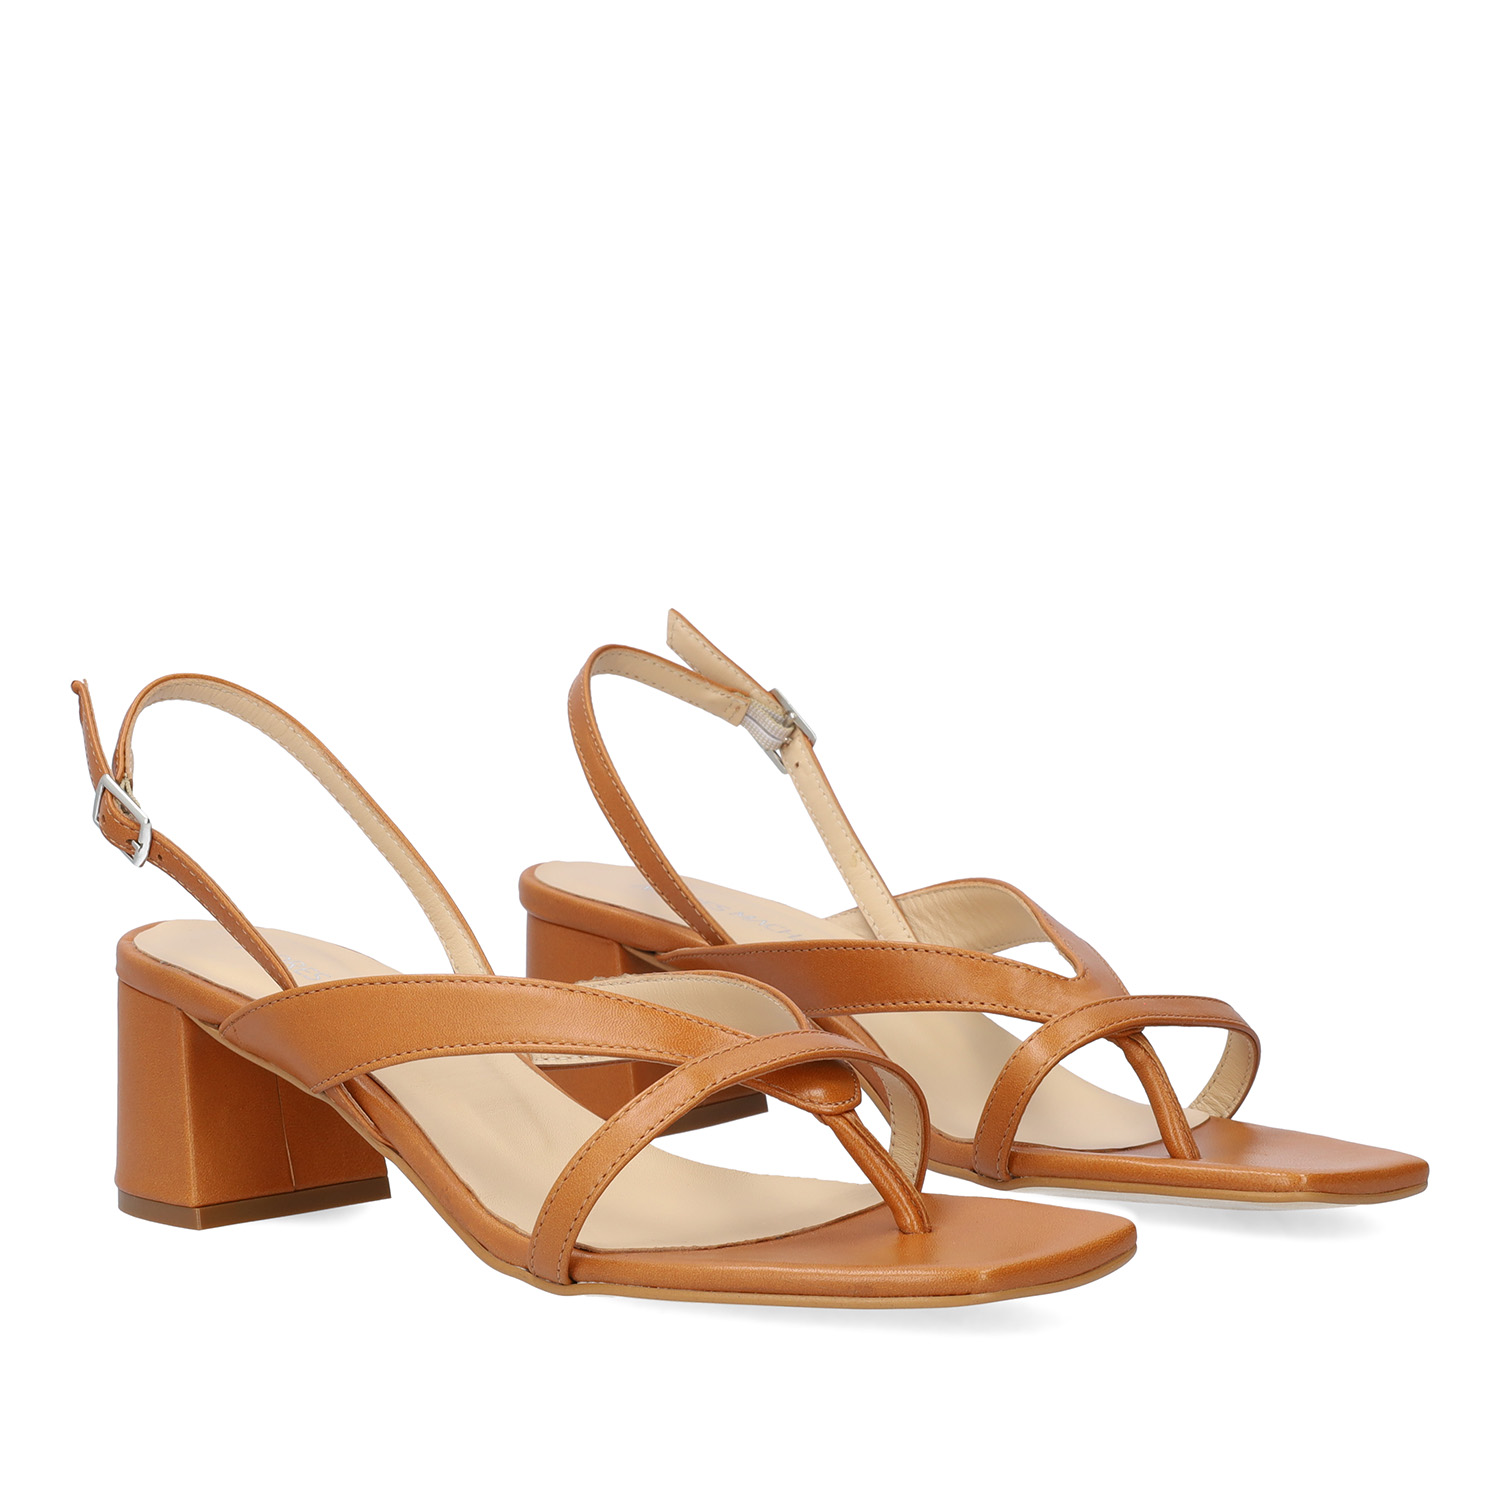 Heeled sandals in brown leather 